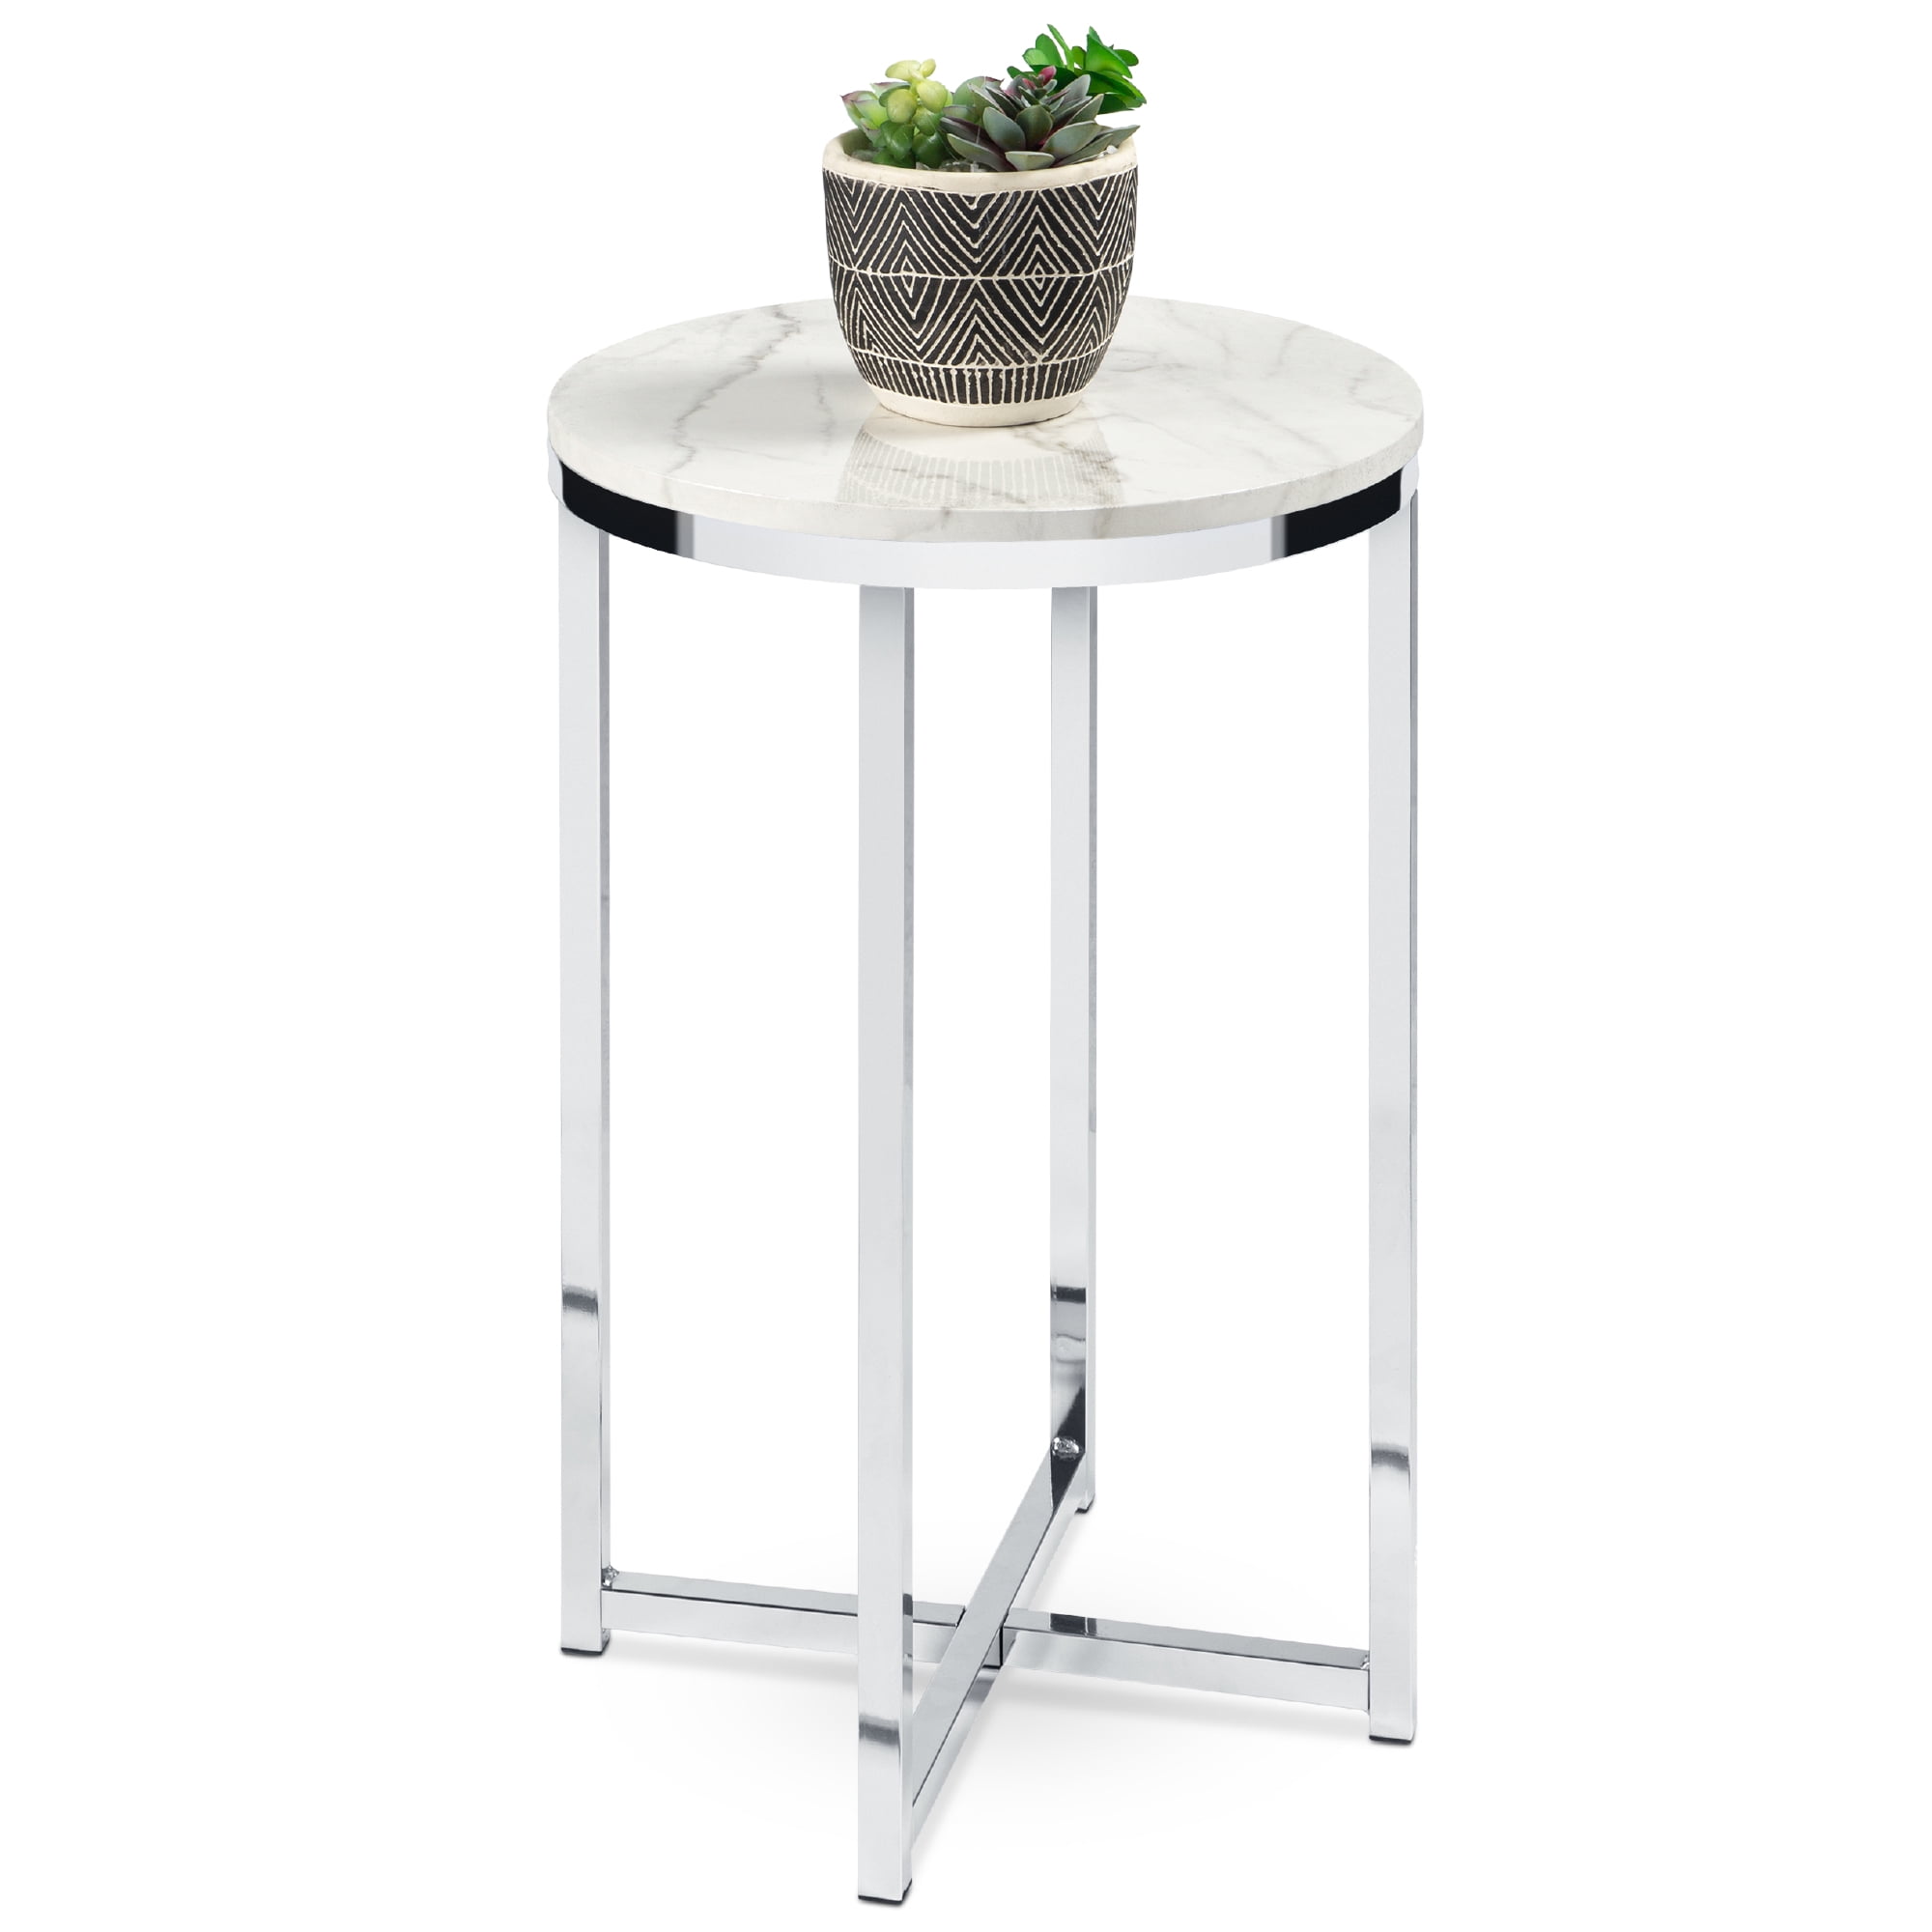 White Round End Table with Storage Basket and Metal Tray Top Bamboo Side Table for Living Room Bedroom Nightstand Table 